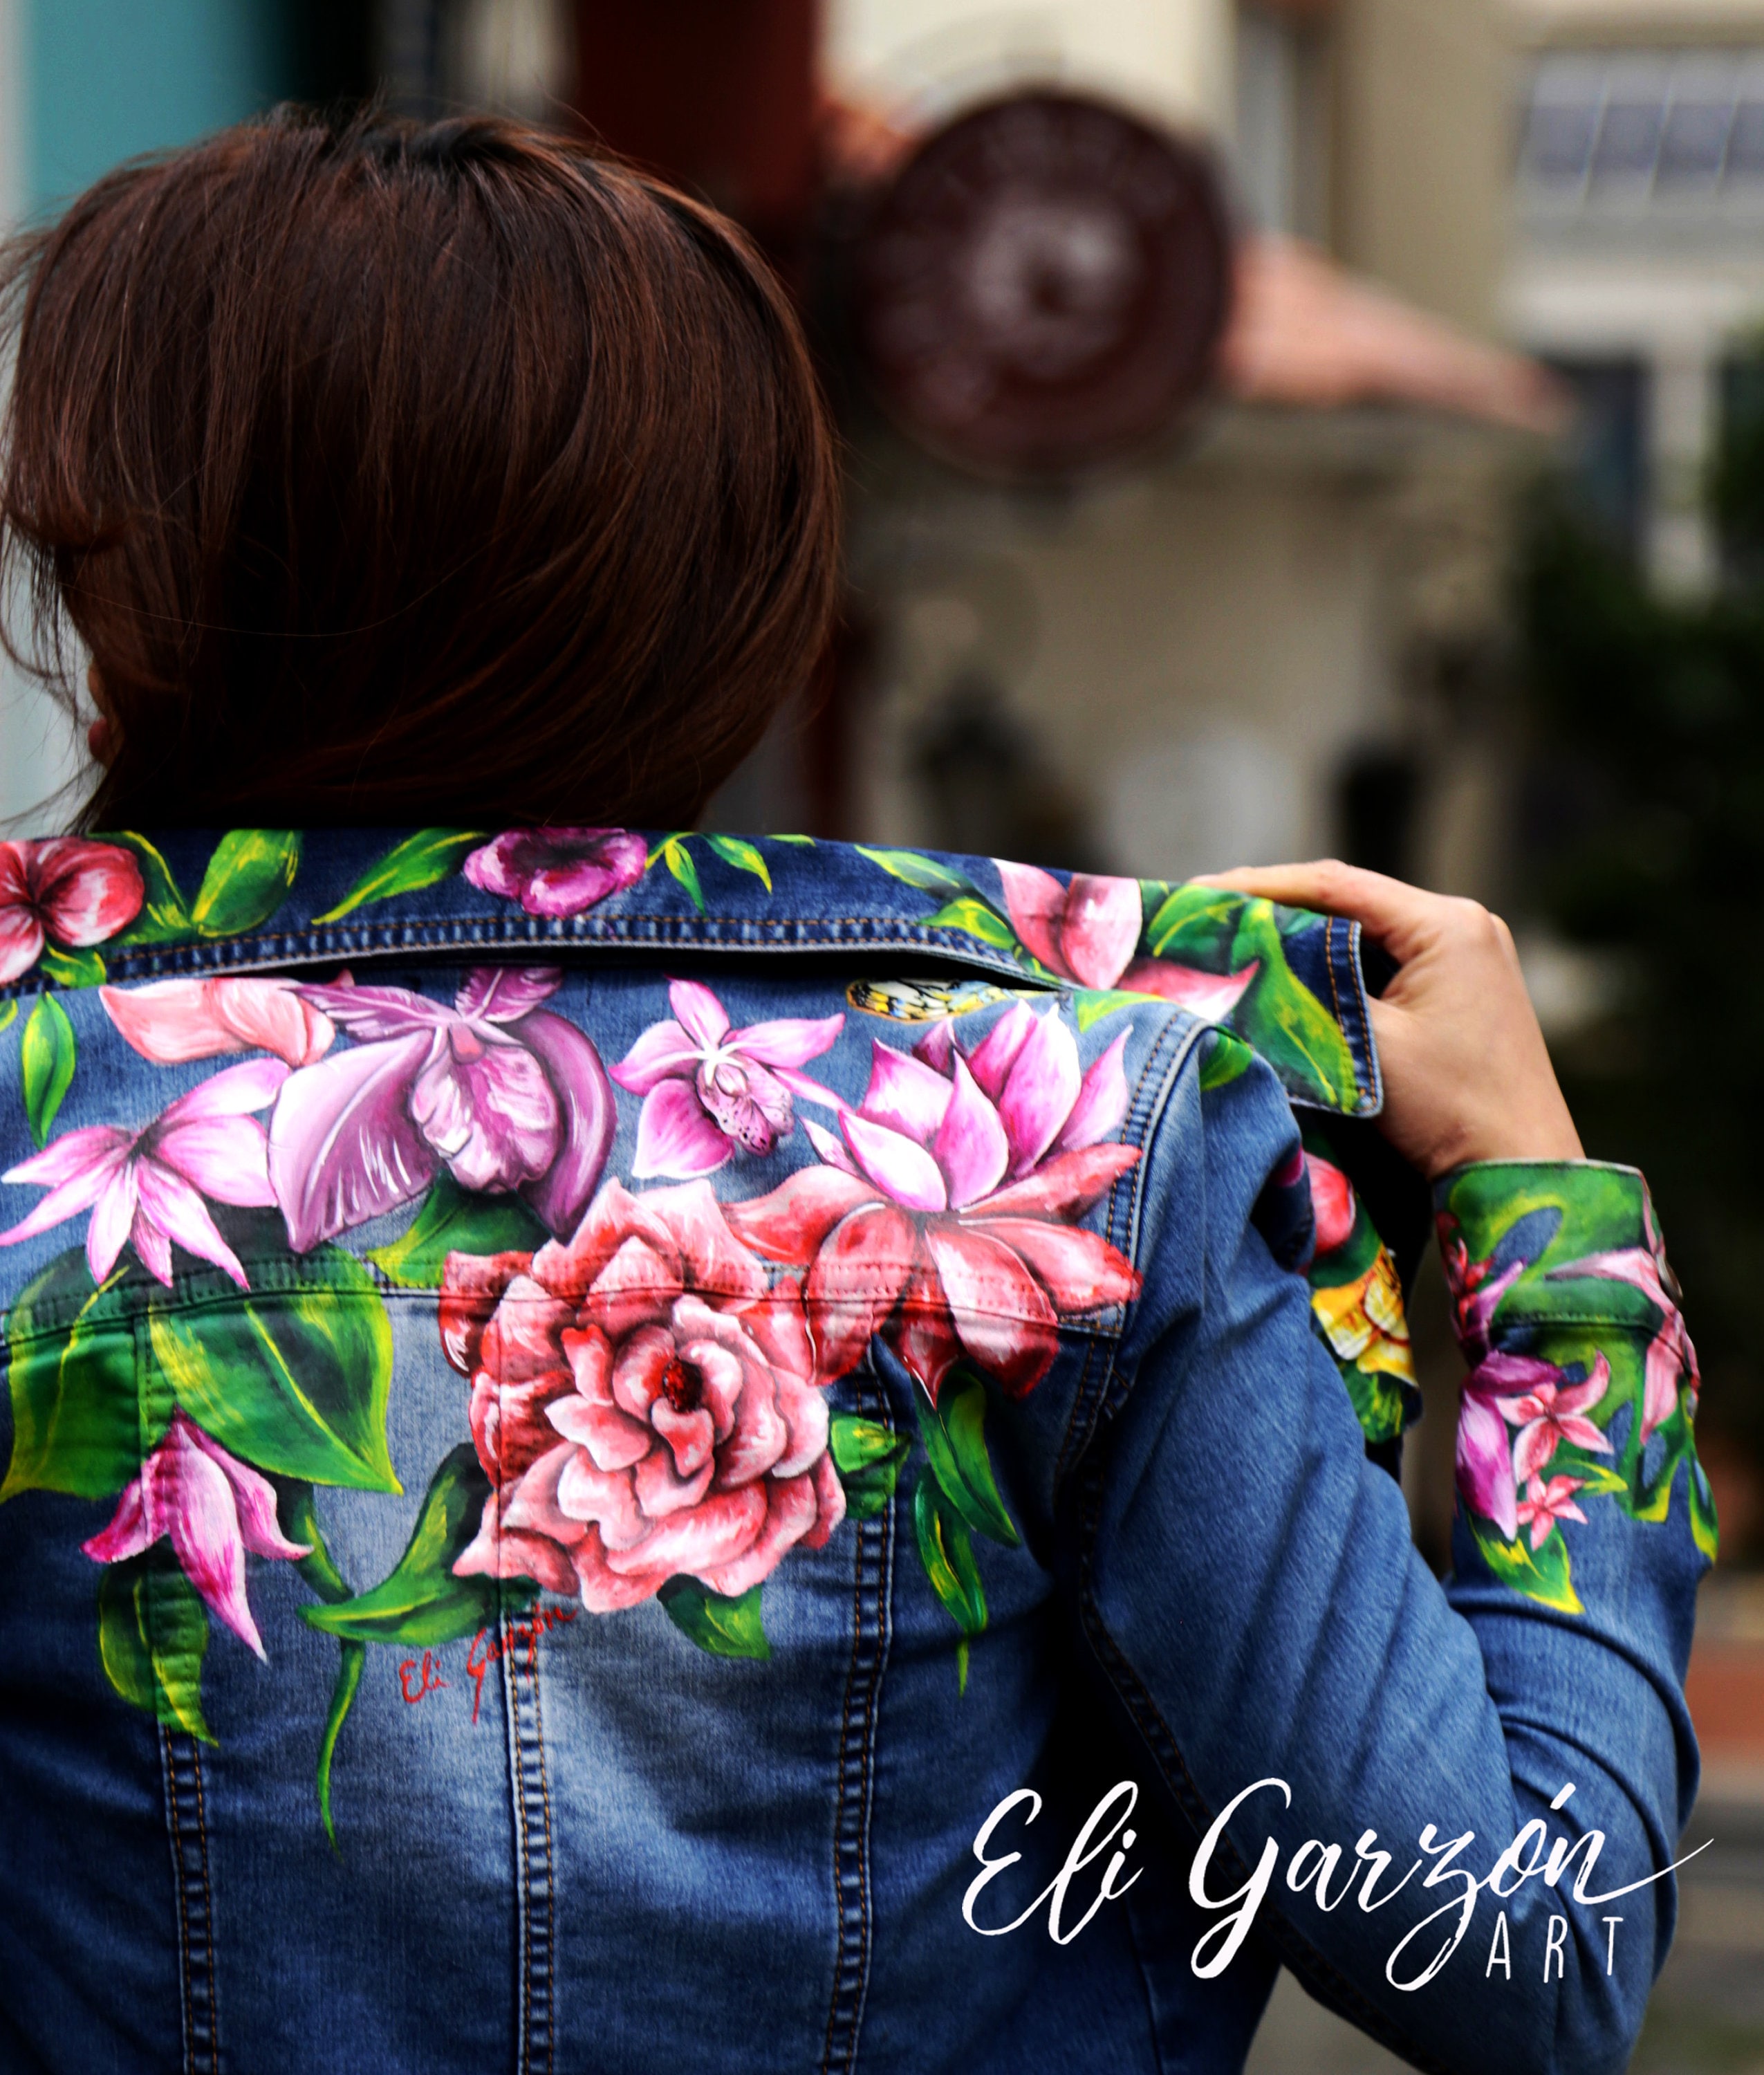 THE FLORAL WOMEN HAND-PAINTED DENIM JACKET